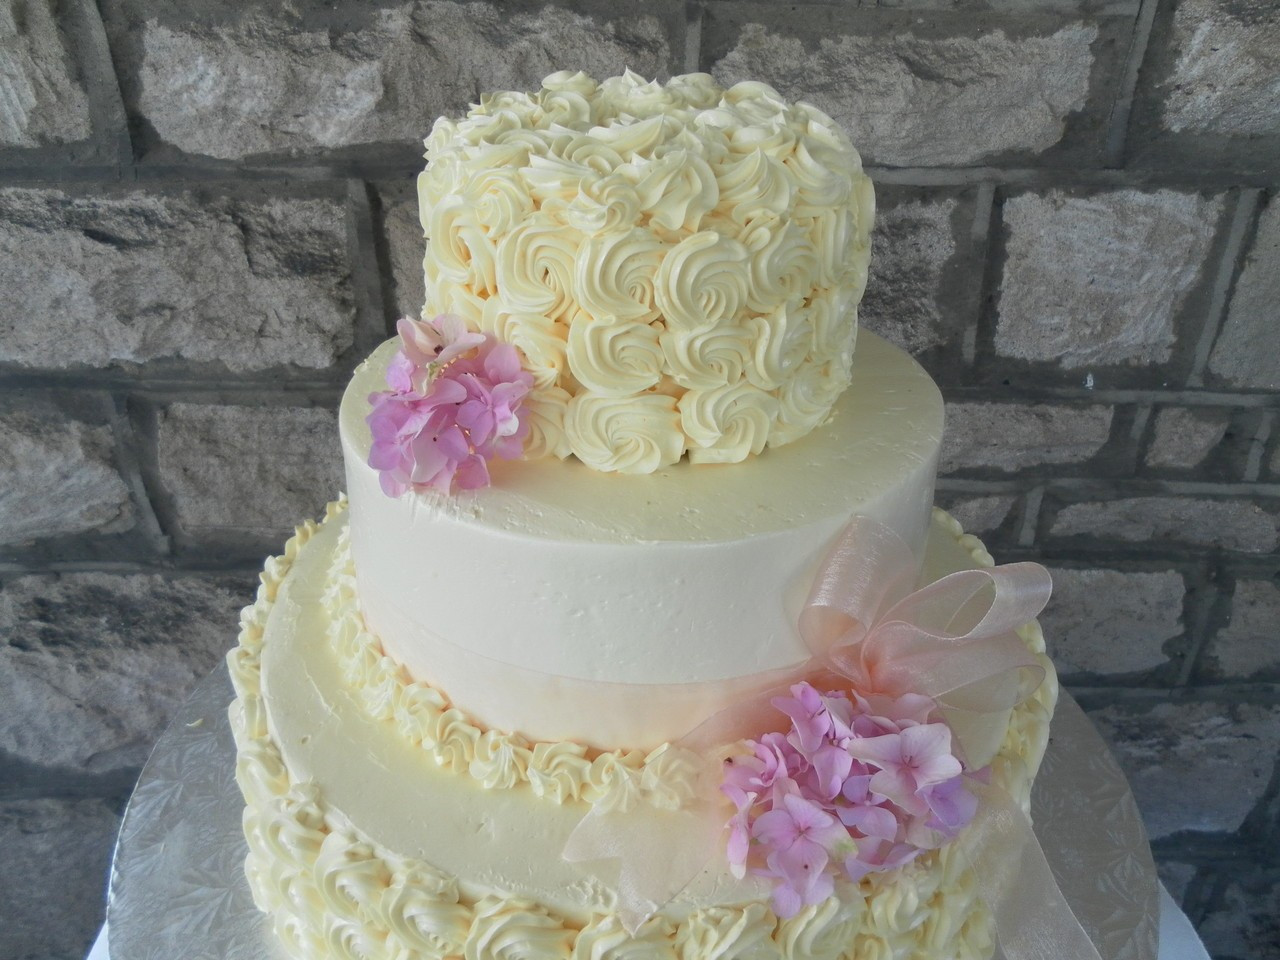 Wedding Cakes Delivered
 New Wedding Cake Delivery Service